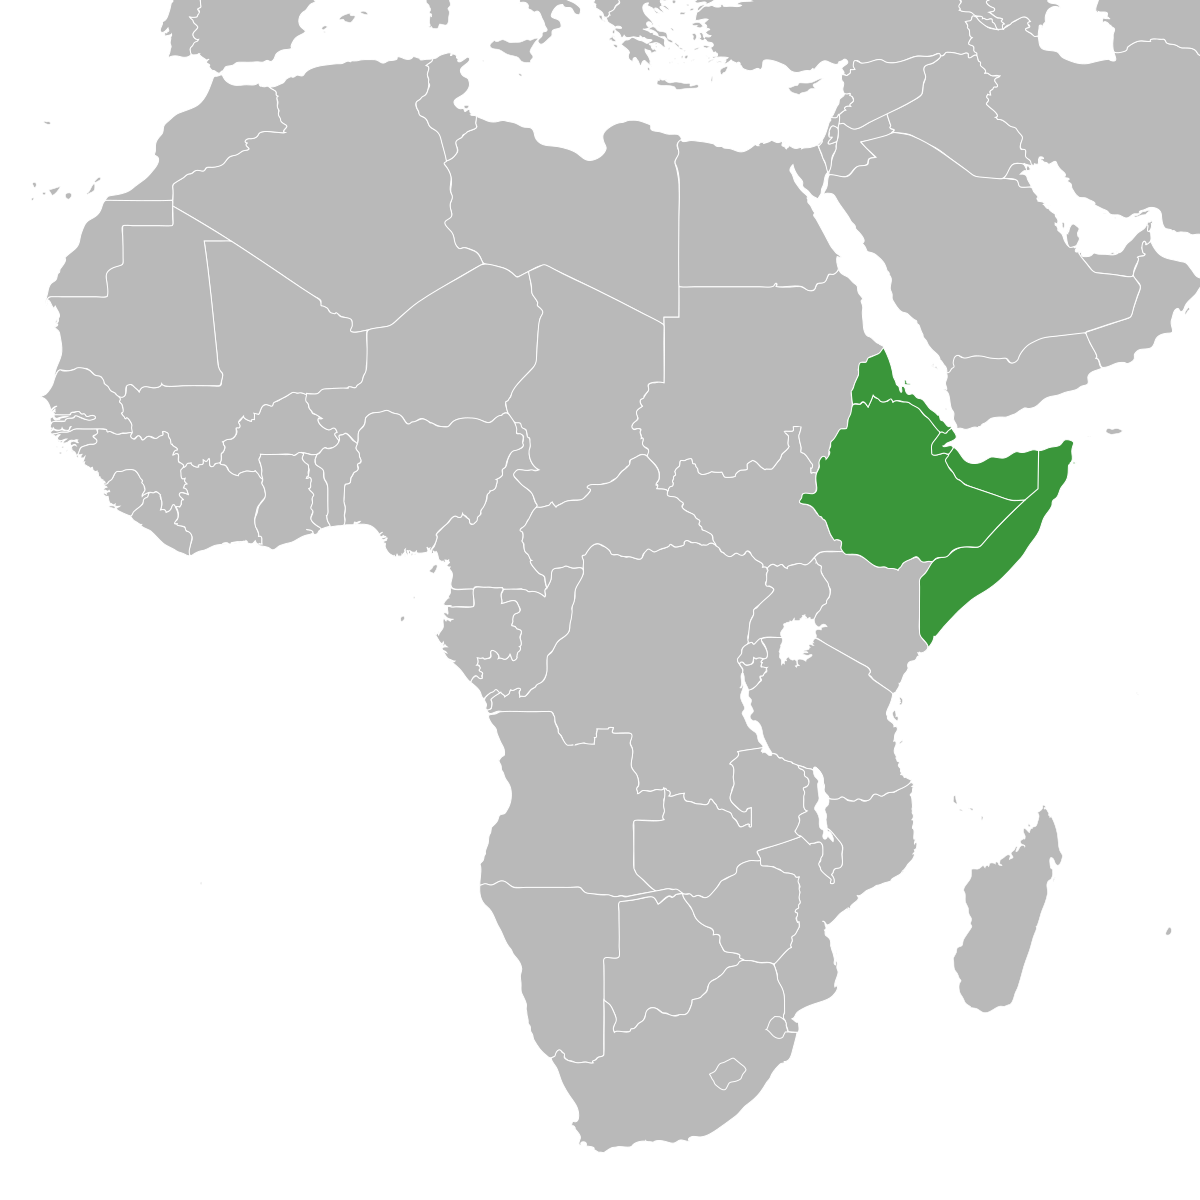 1200px-Horn_of_Africa_states.svg.png